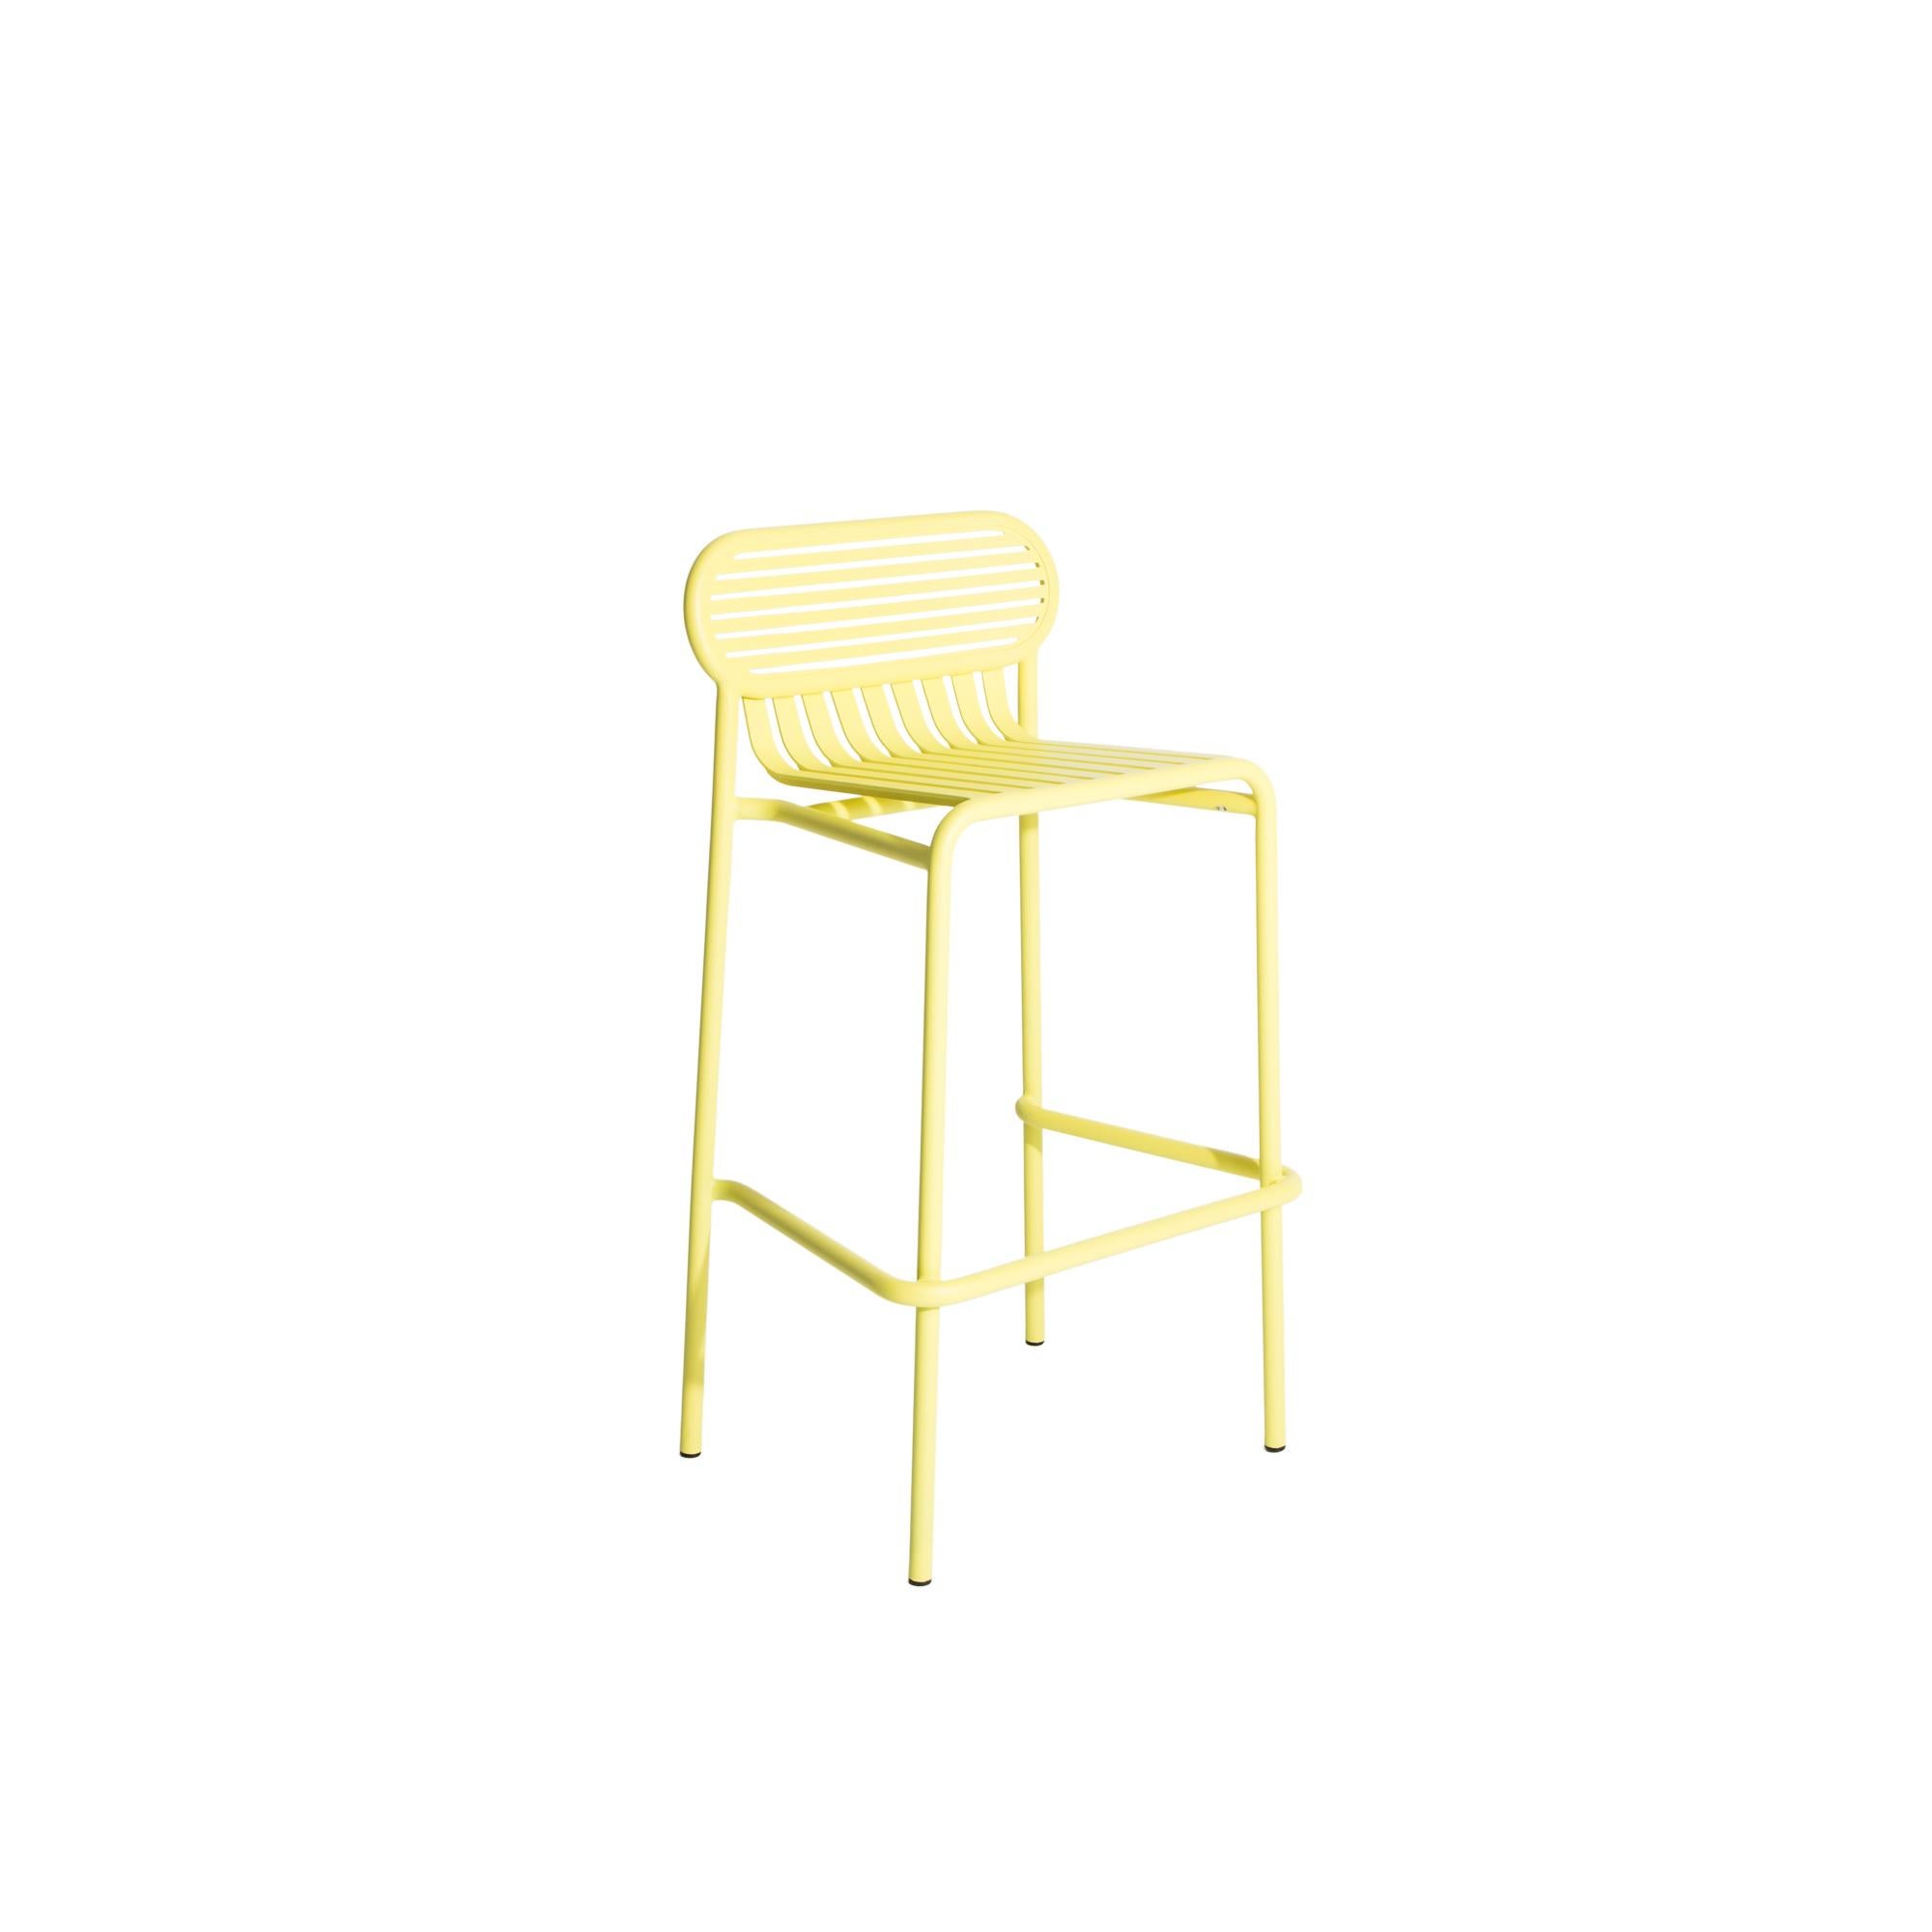 Petite Friture Week-End Bar Stool in Yellow Aluminium by Studio BrichetZiegler, 2017

The week-end collection is a full range of outdoor furniture, in aluminium grained epoxy paint, matt finish, that includes 18 functions and 8 colours for the